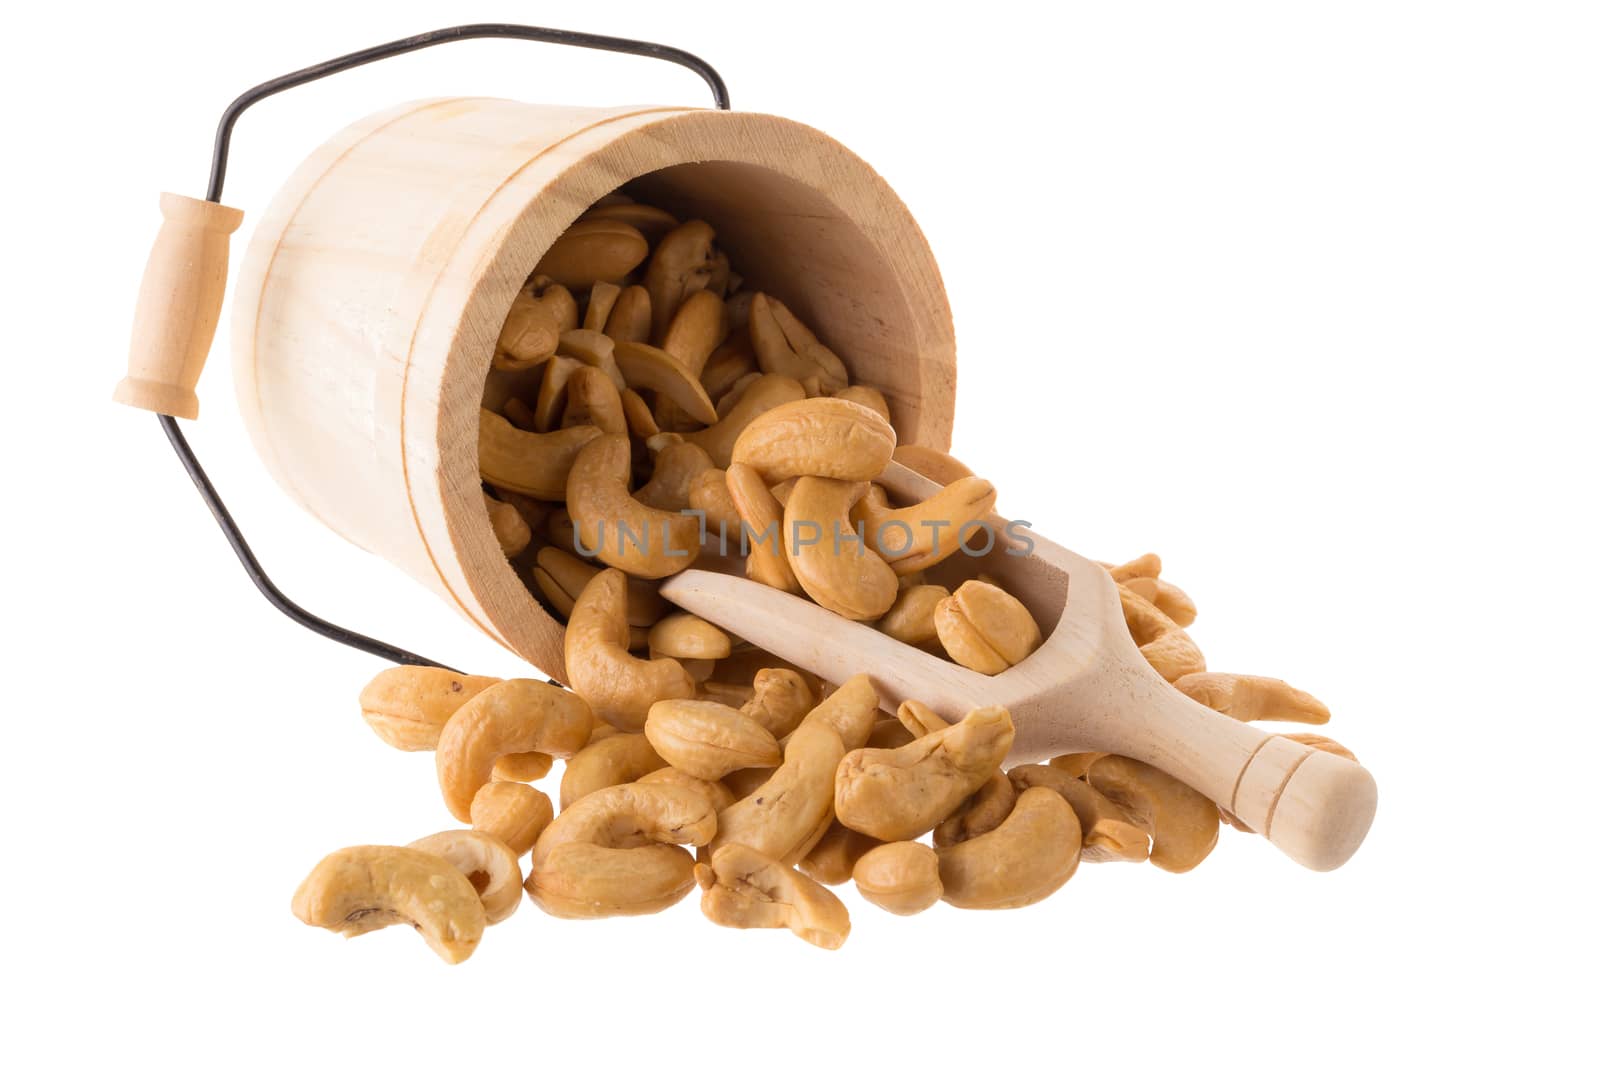 Closeup of cashew nuts in a Wooden buckets isolated on white bac by kaiskynet